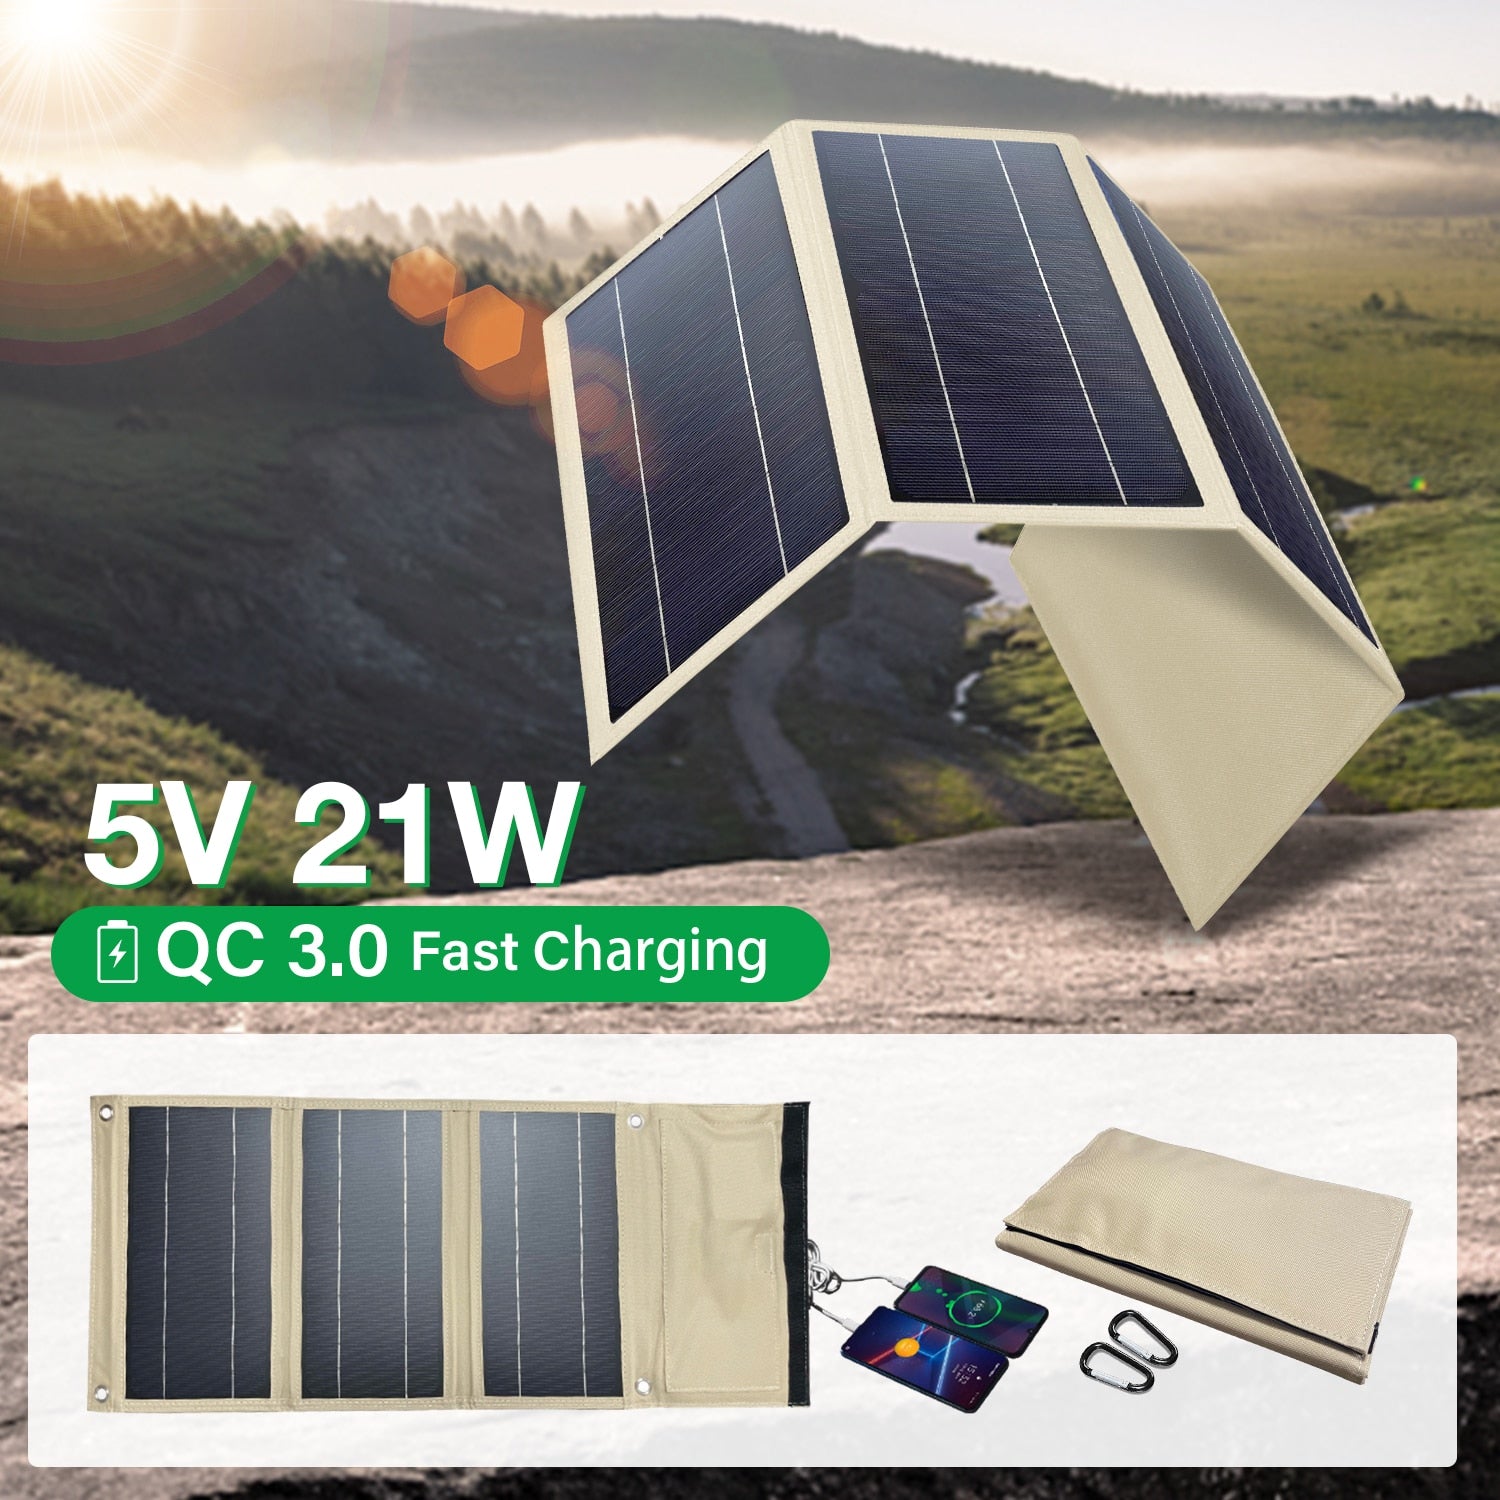 21W Solar Panel qc3.0 5V 9V 12V Portable Power Bank 2USB solar charger For outdoor camping RV Car battery fishing cell phone